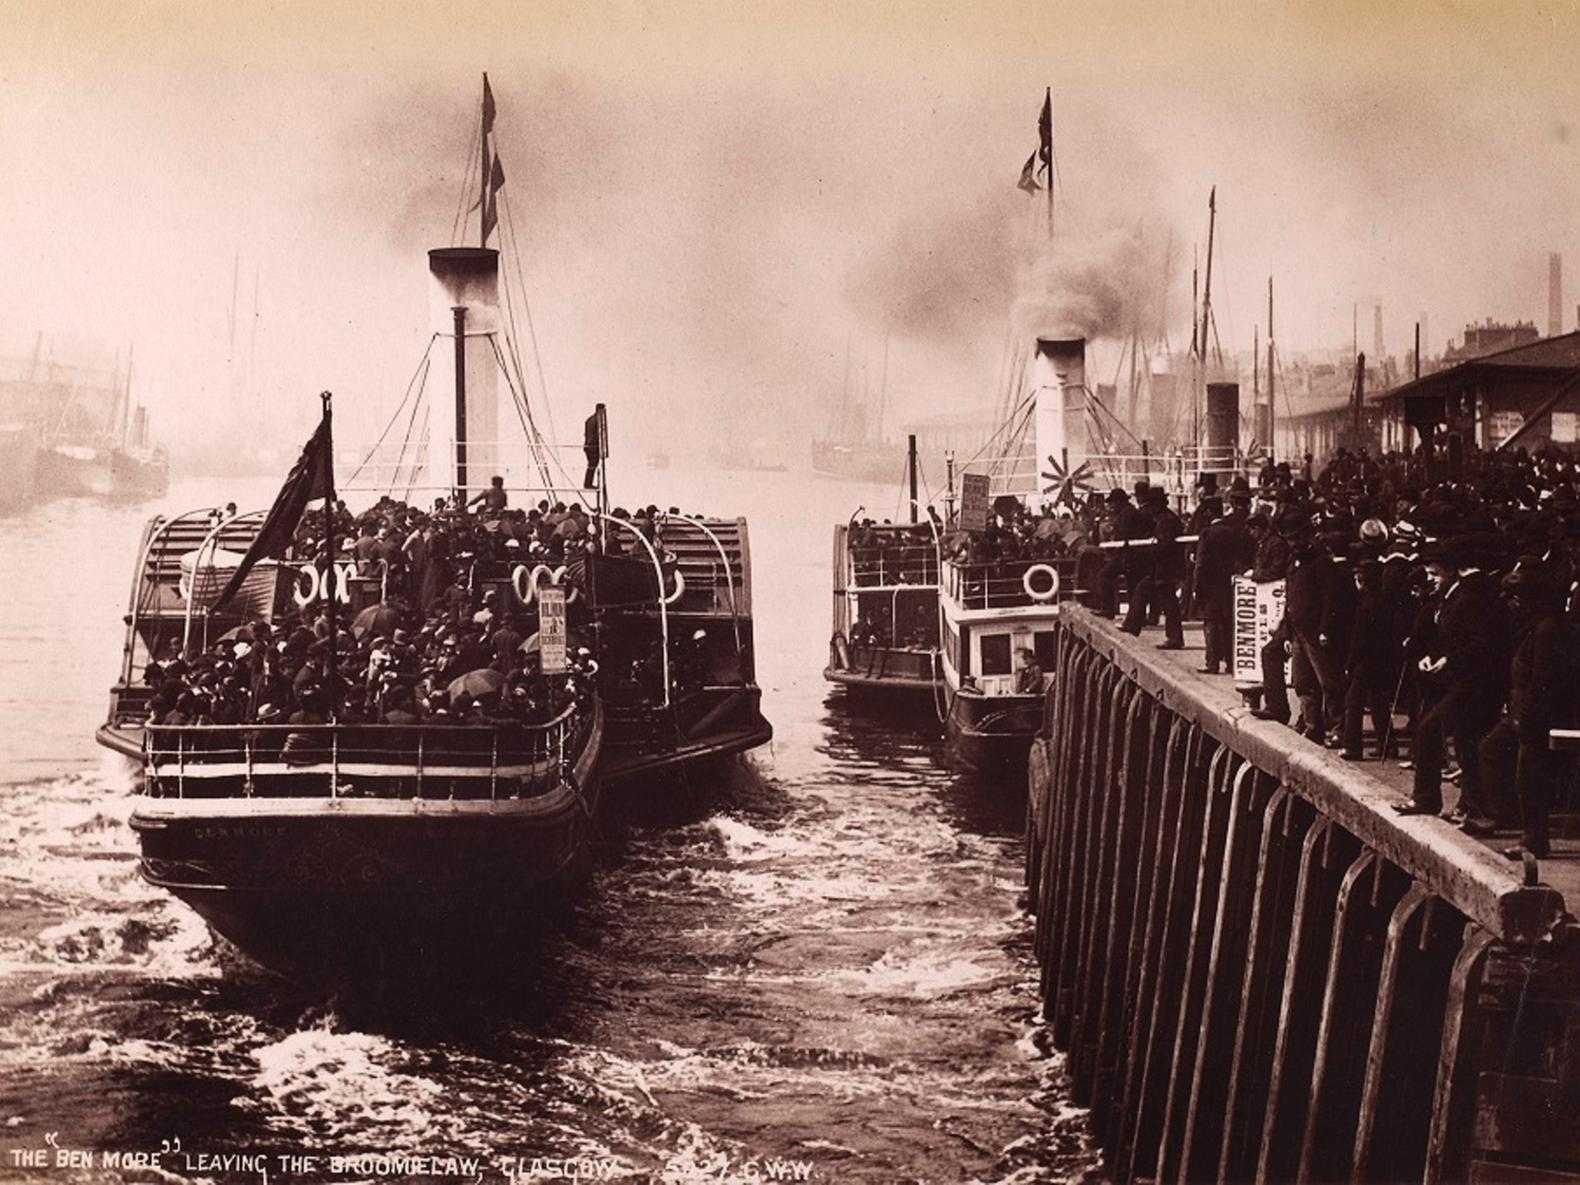 The seas were once crucial communication lines and the scene for many a battle, but later they became a source of pleasure for many, including these people boarding paddle steamers at Broomielaw for a trip down the Forth of Clyde.